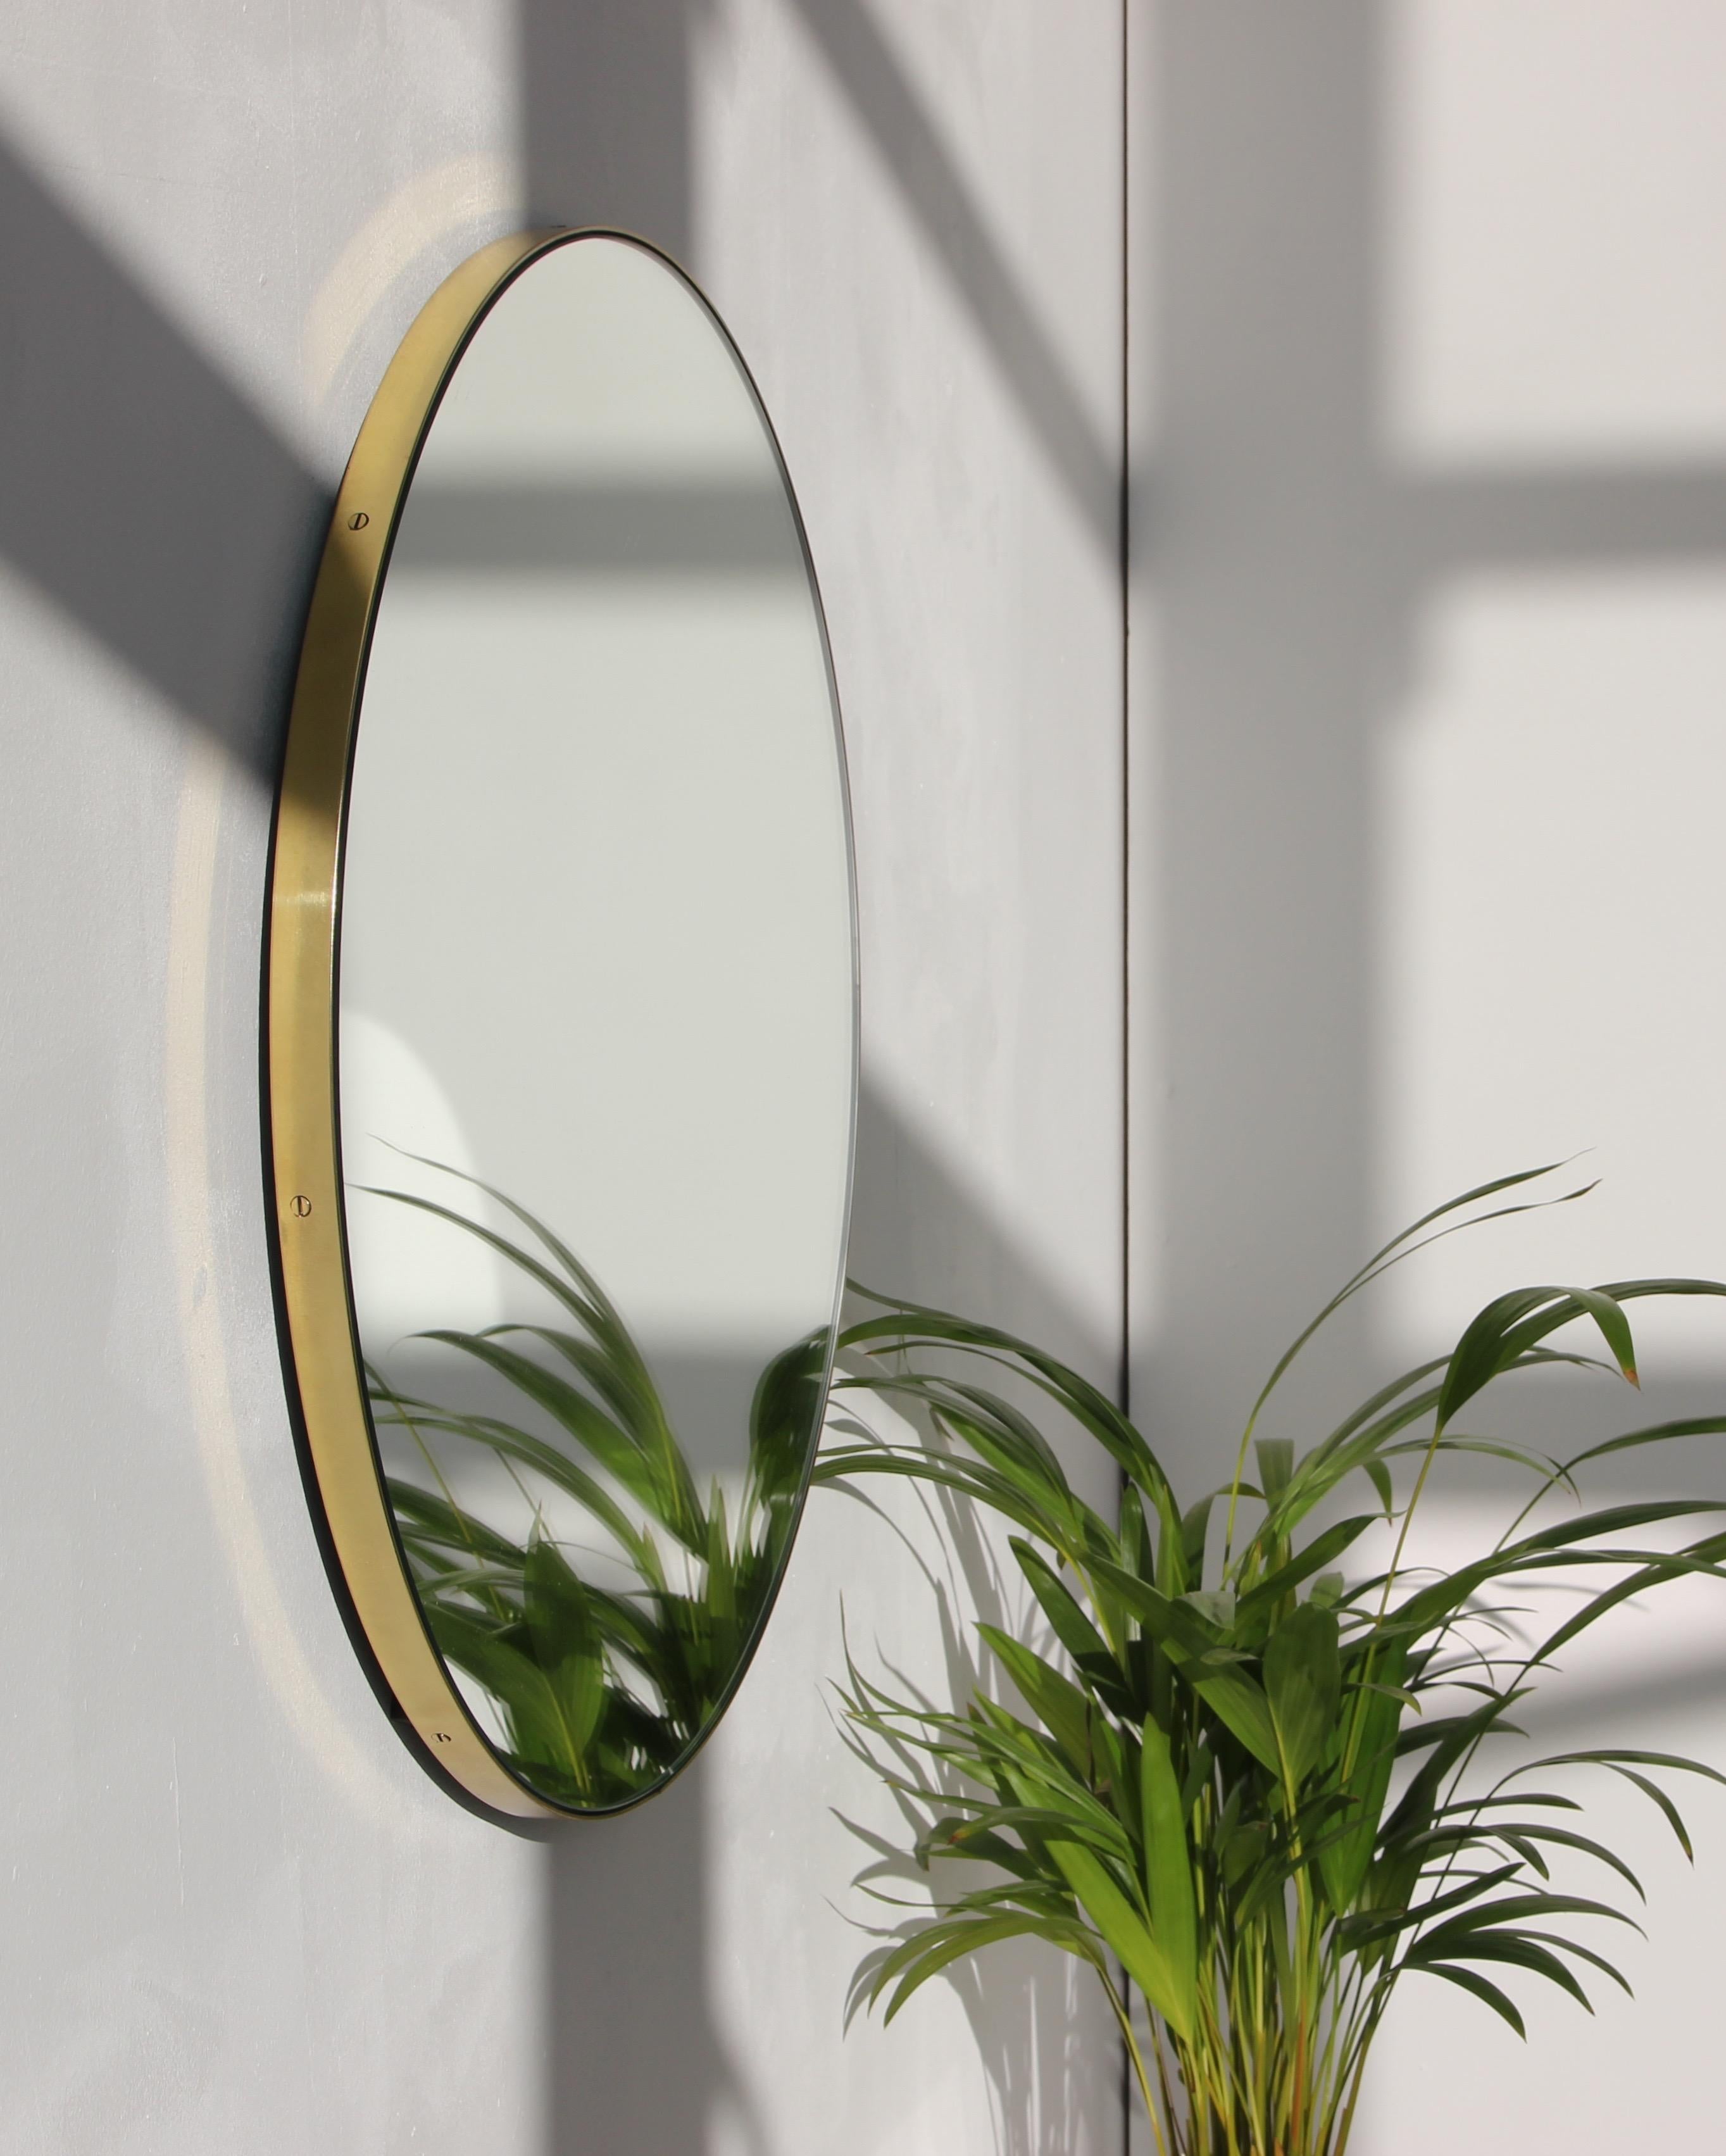 Minimalist Orbis™ round mirror with an elegant solid brushed brass frame. The detailing and finish, including visible brass screws, emphasise the crafty and quality feel of the mirror, a true signature of our brand. Designed and made in London,